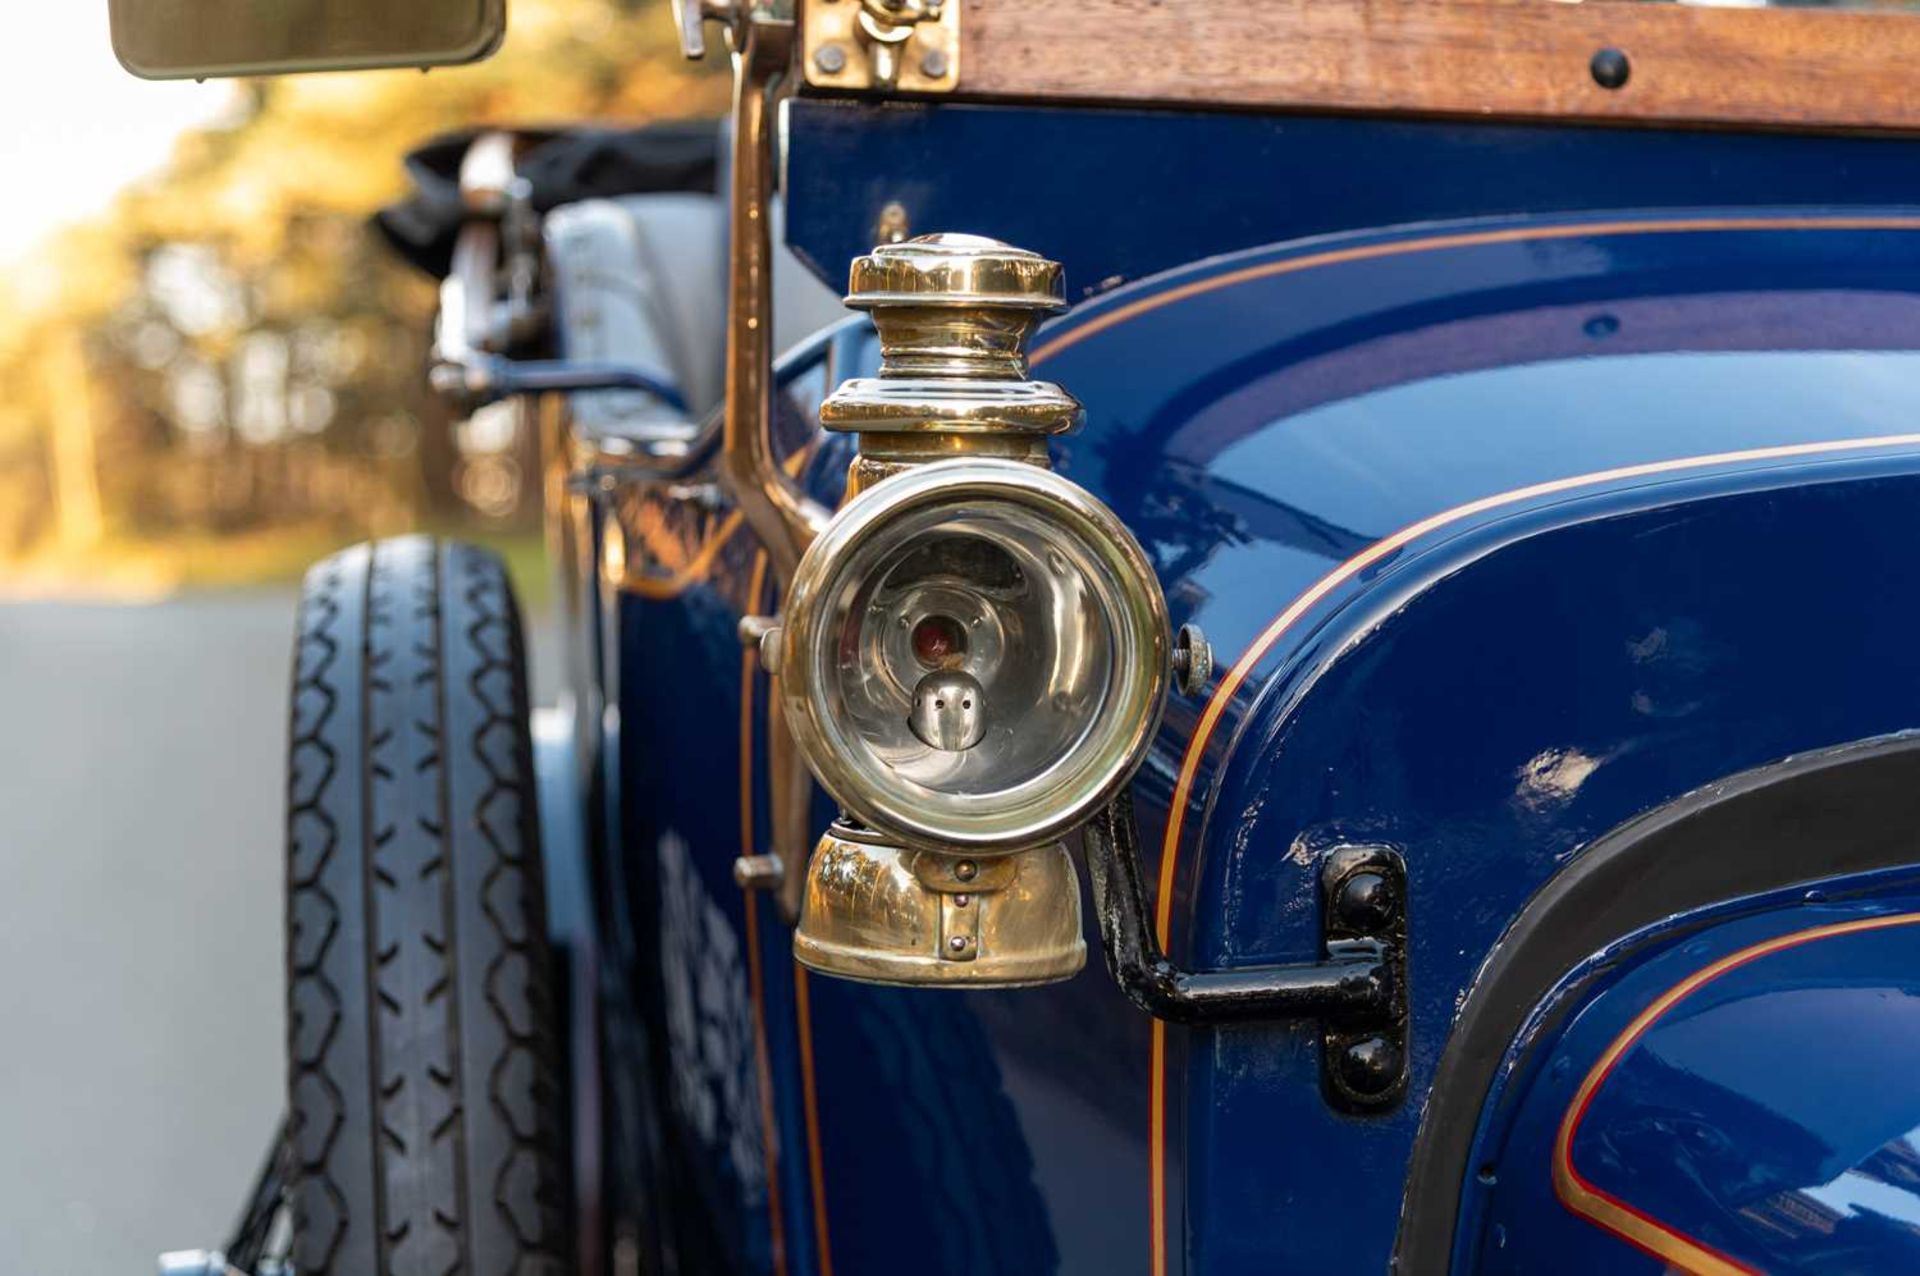 1913 Talbot 4CT 12HP Colonial Drop Head Coupe  Complete with Veteran Car Club dating certificate - Image 31 of 86